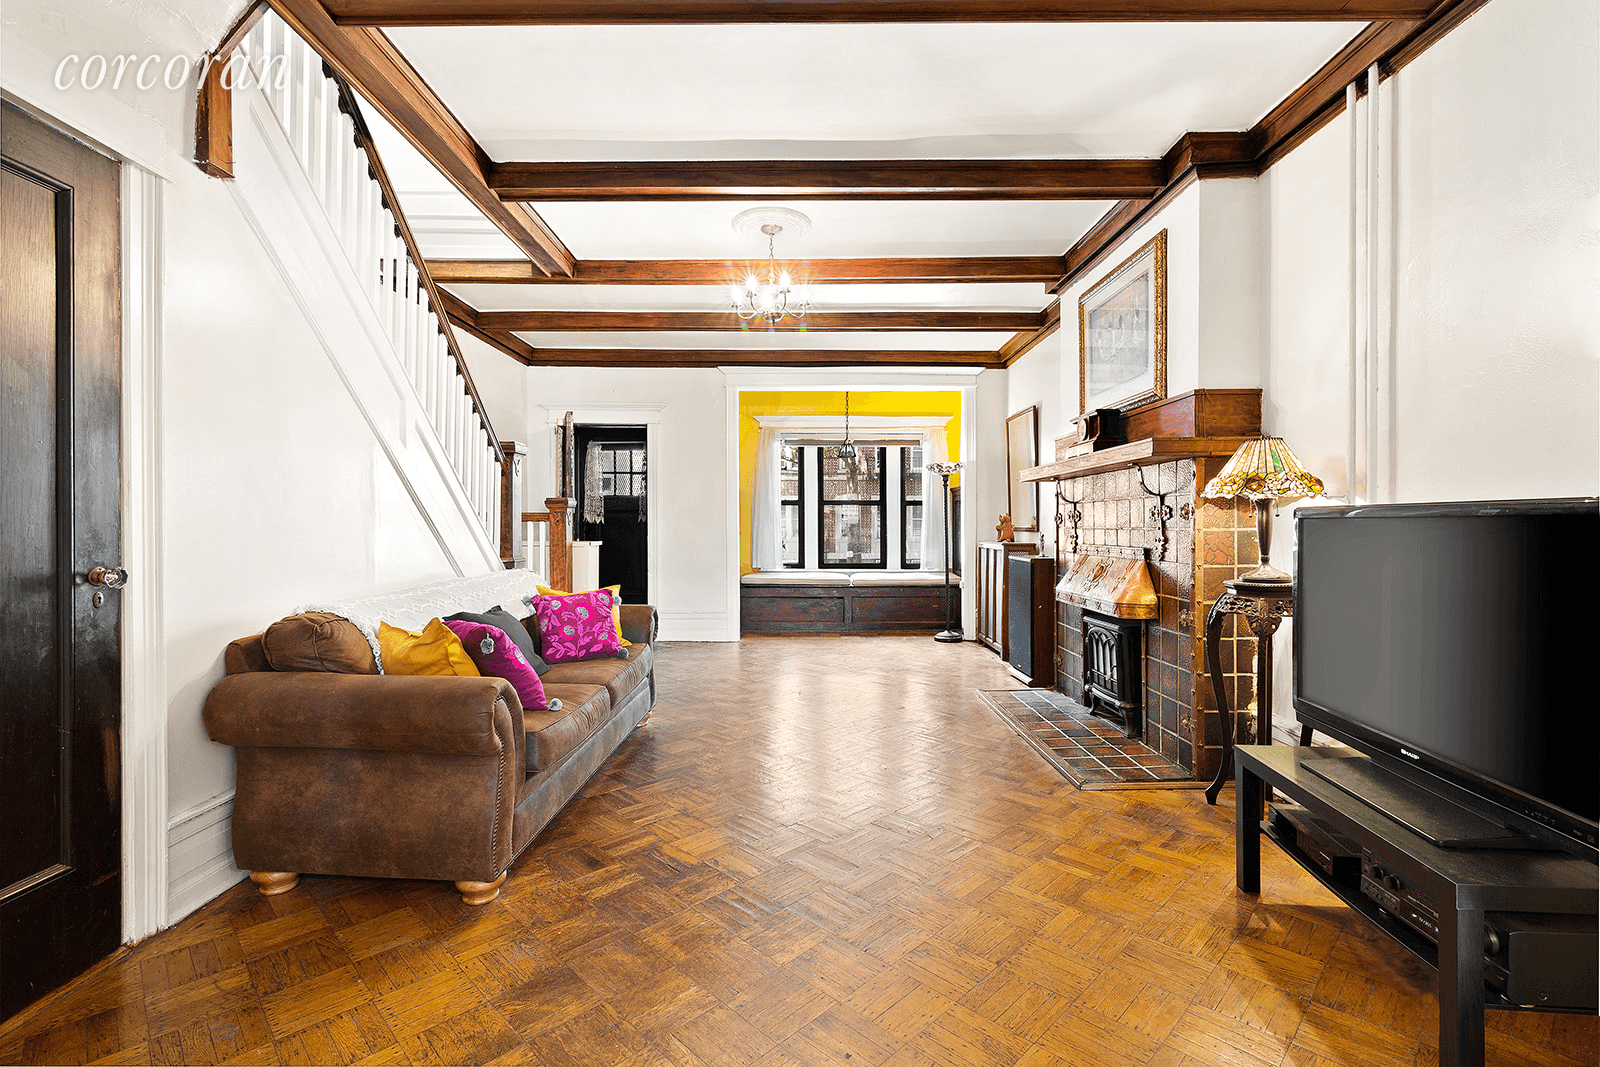 Dripping in period details and charm is this lovely well preserved brick Crown Heights single family row house built in 1915 by Charles A.